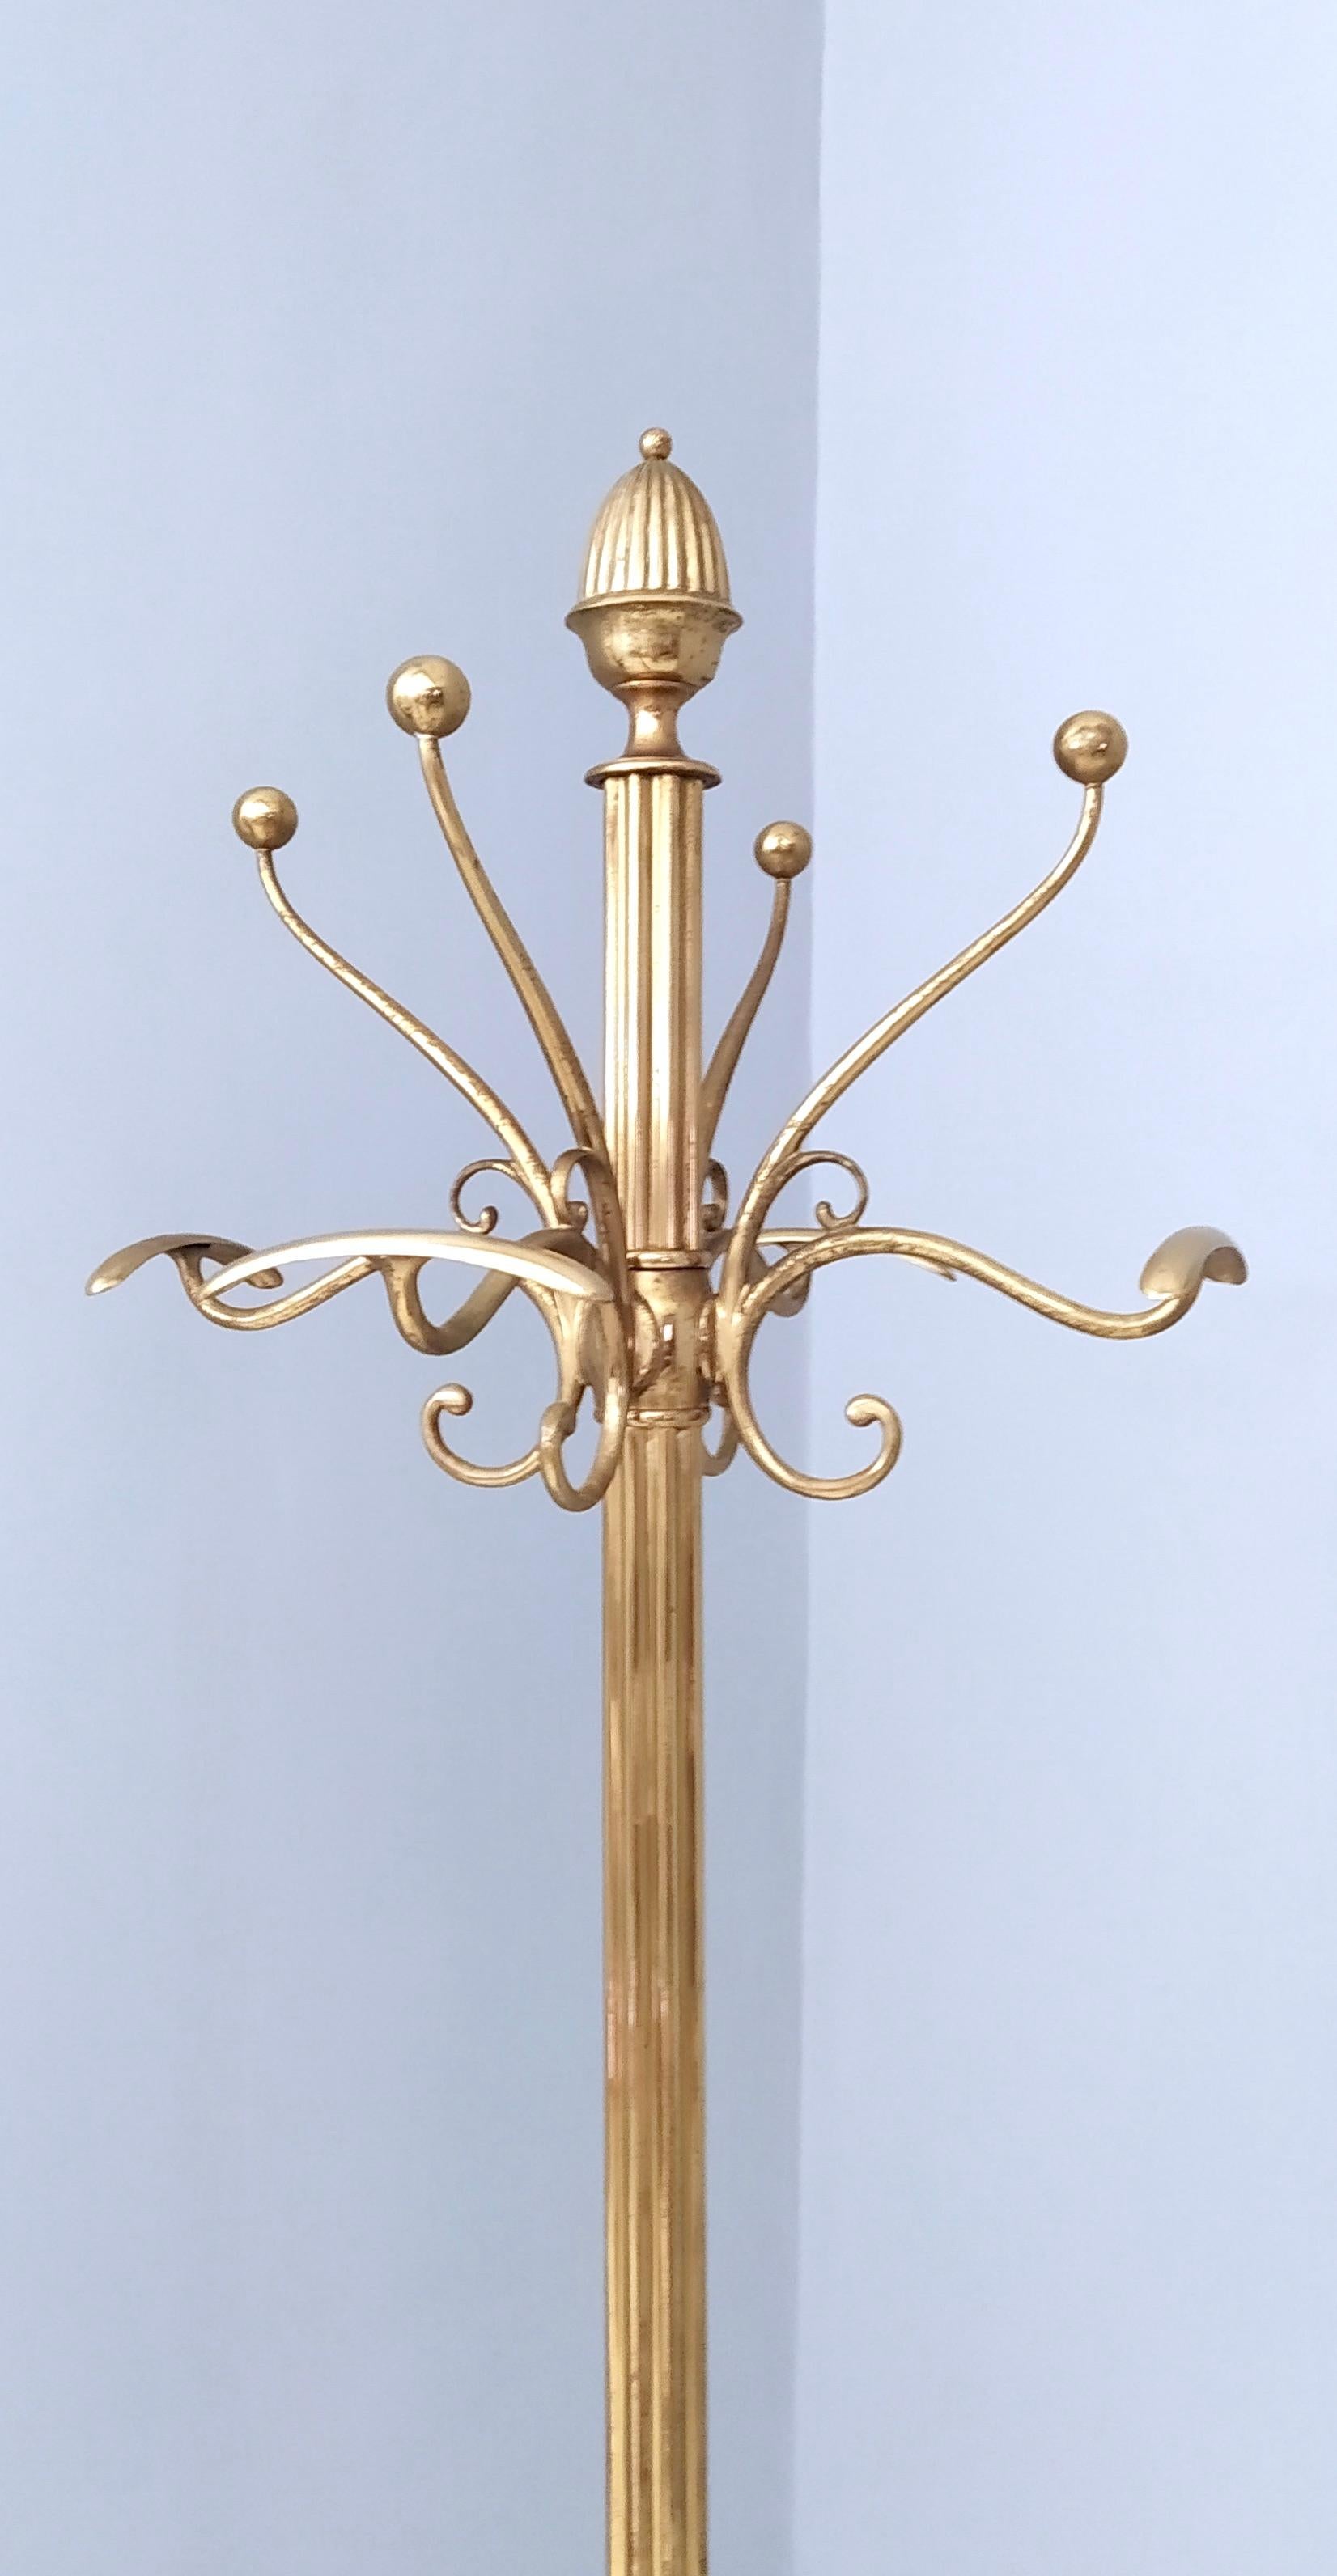 Italian High-Quality Brass Hat and Coat Rack Ascribable to Piero Fornasetti, Italy 1960s